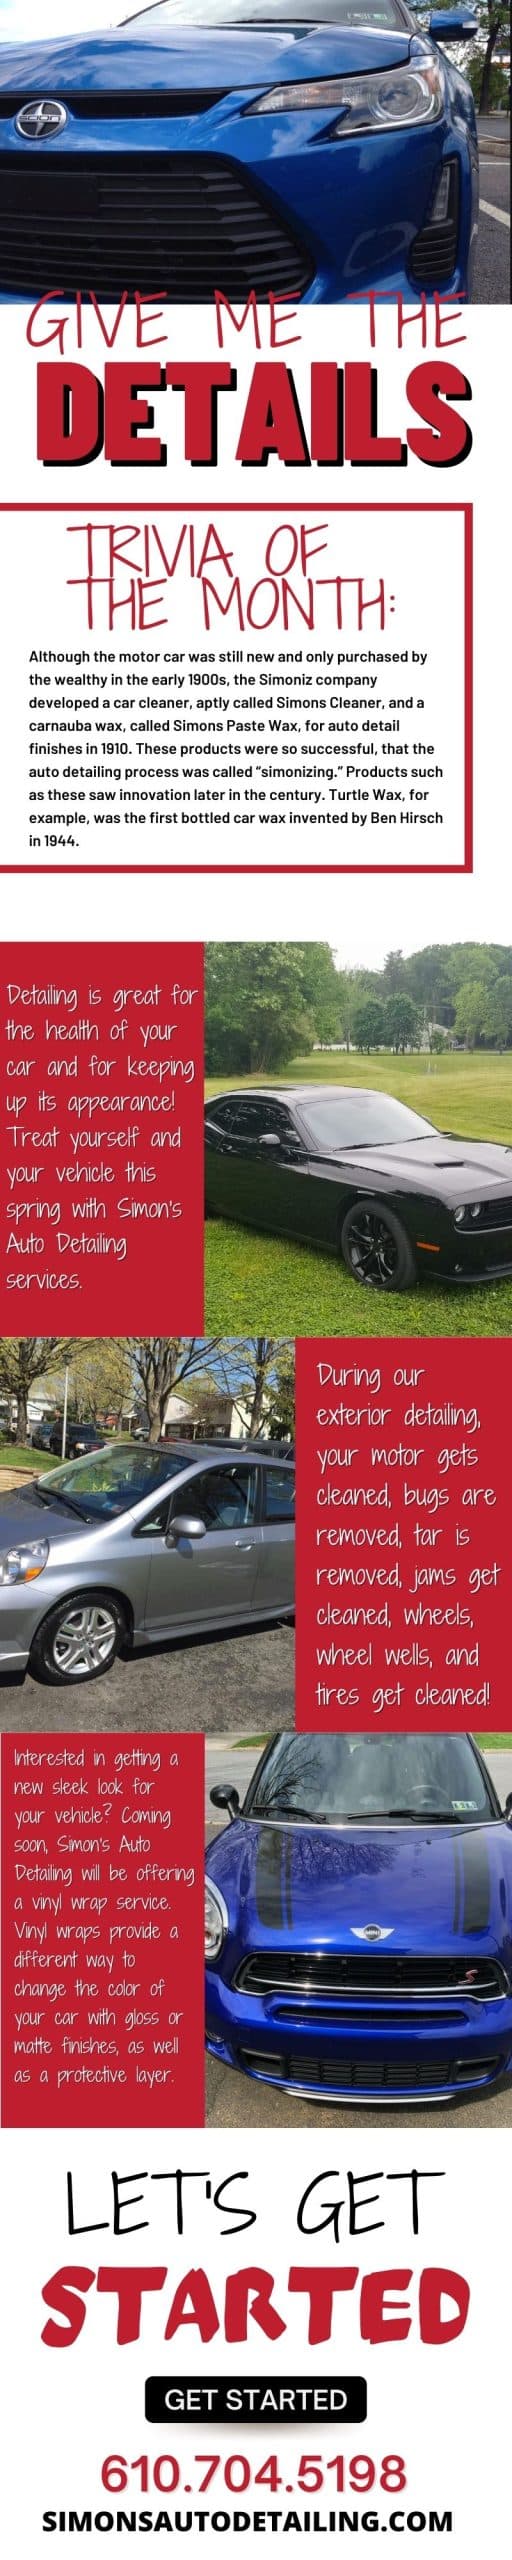 Simons Auto Detailing June 2022 scaled 1